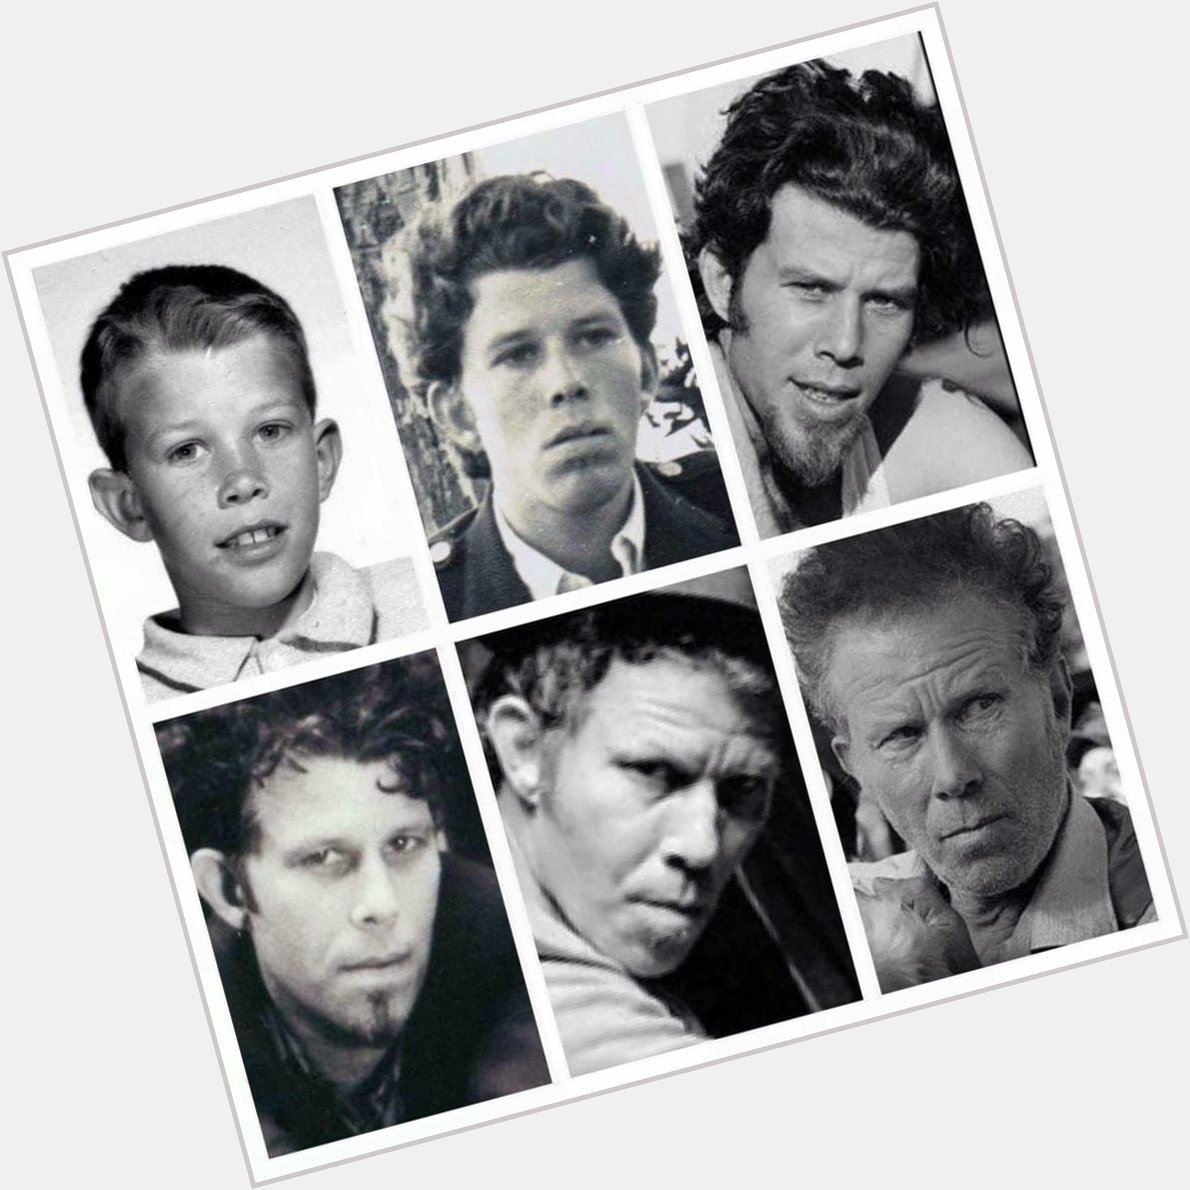 Happy 72nd birthday to legendary musician, actor, and all around weirdo Tom Waits. 